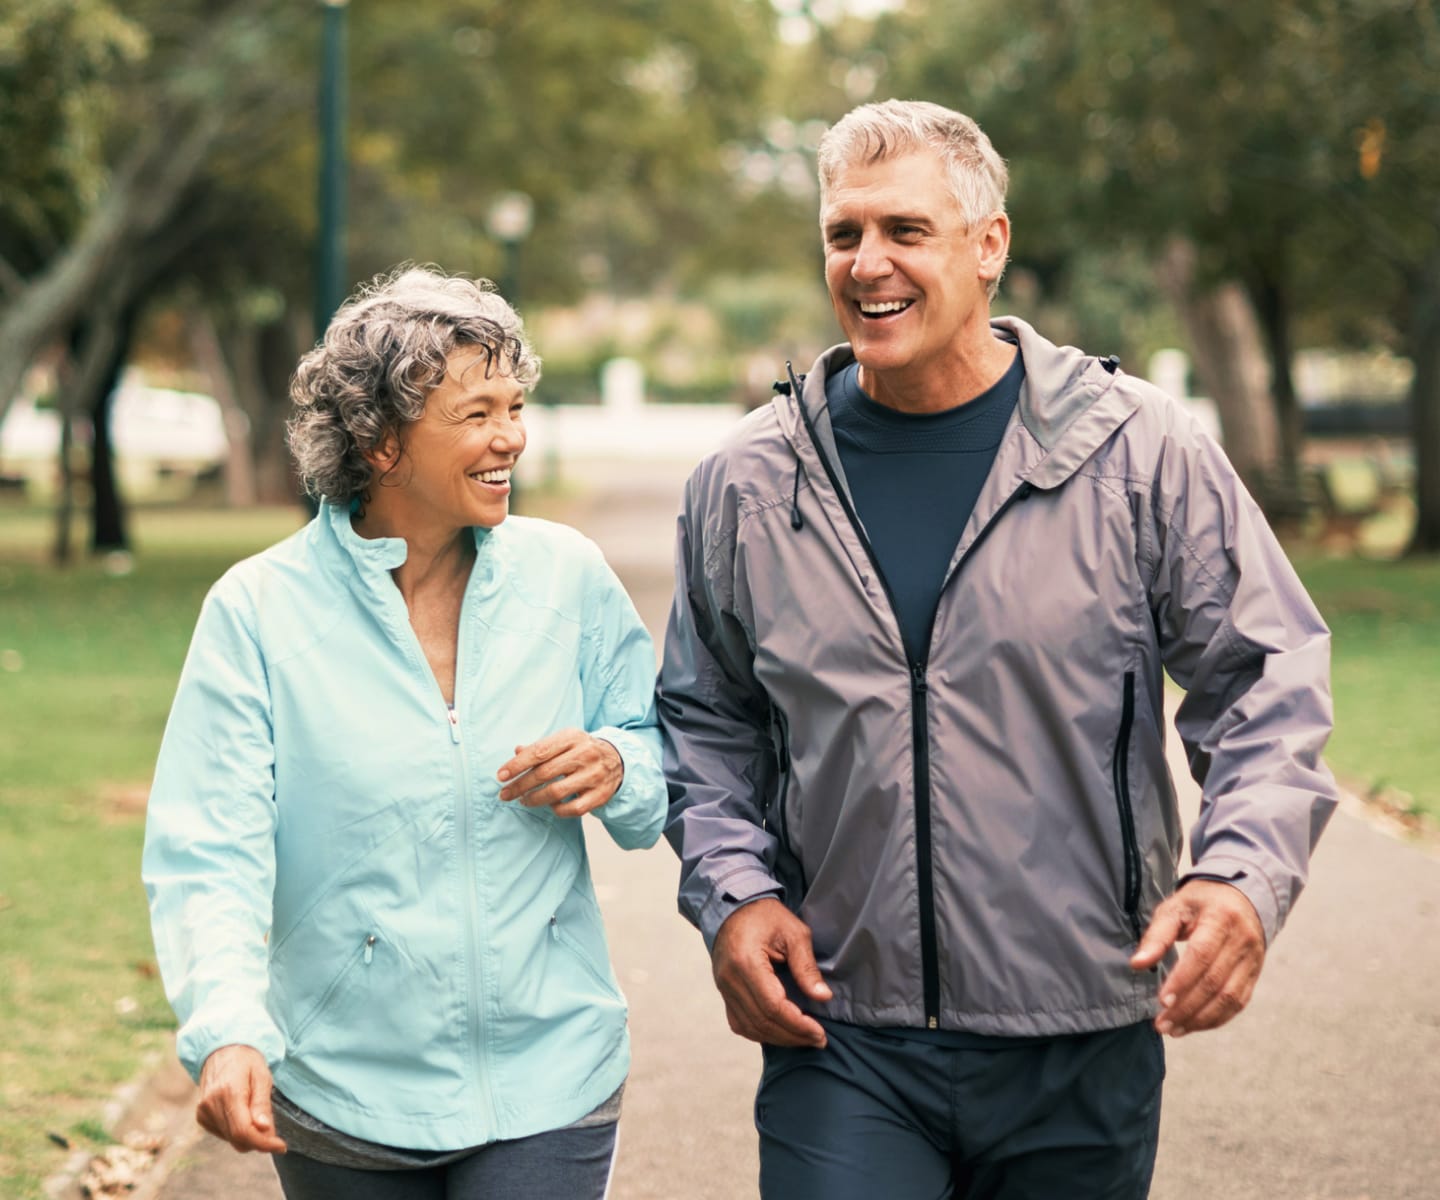 Man and woman smiling while jogging